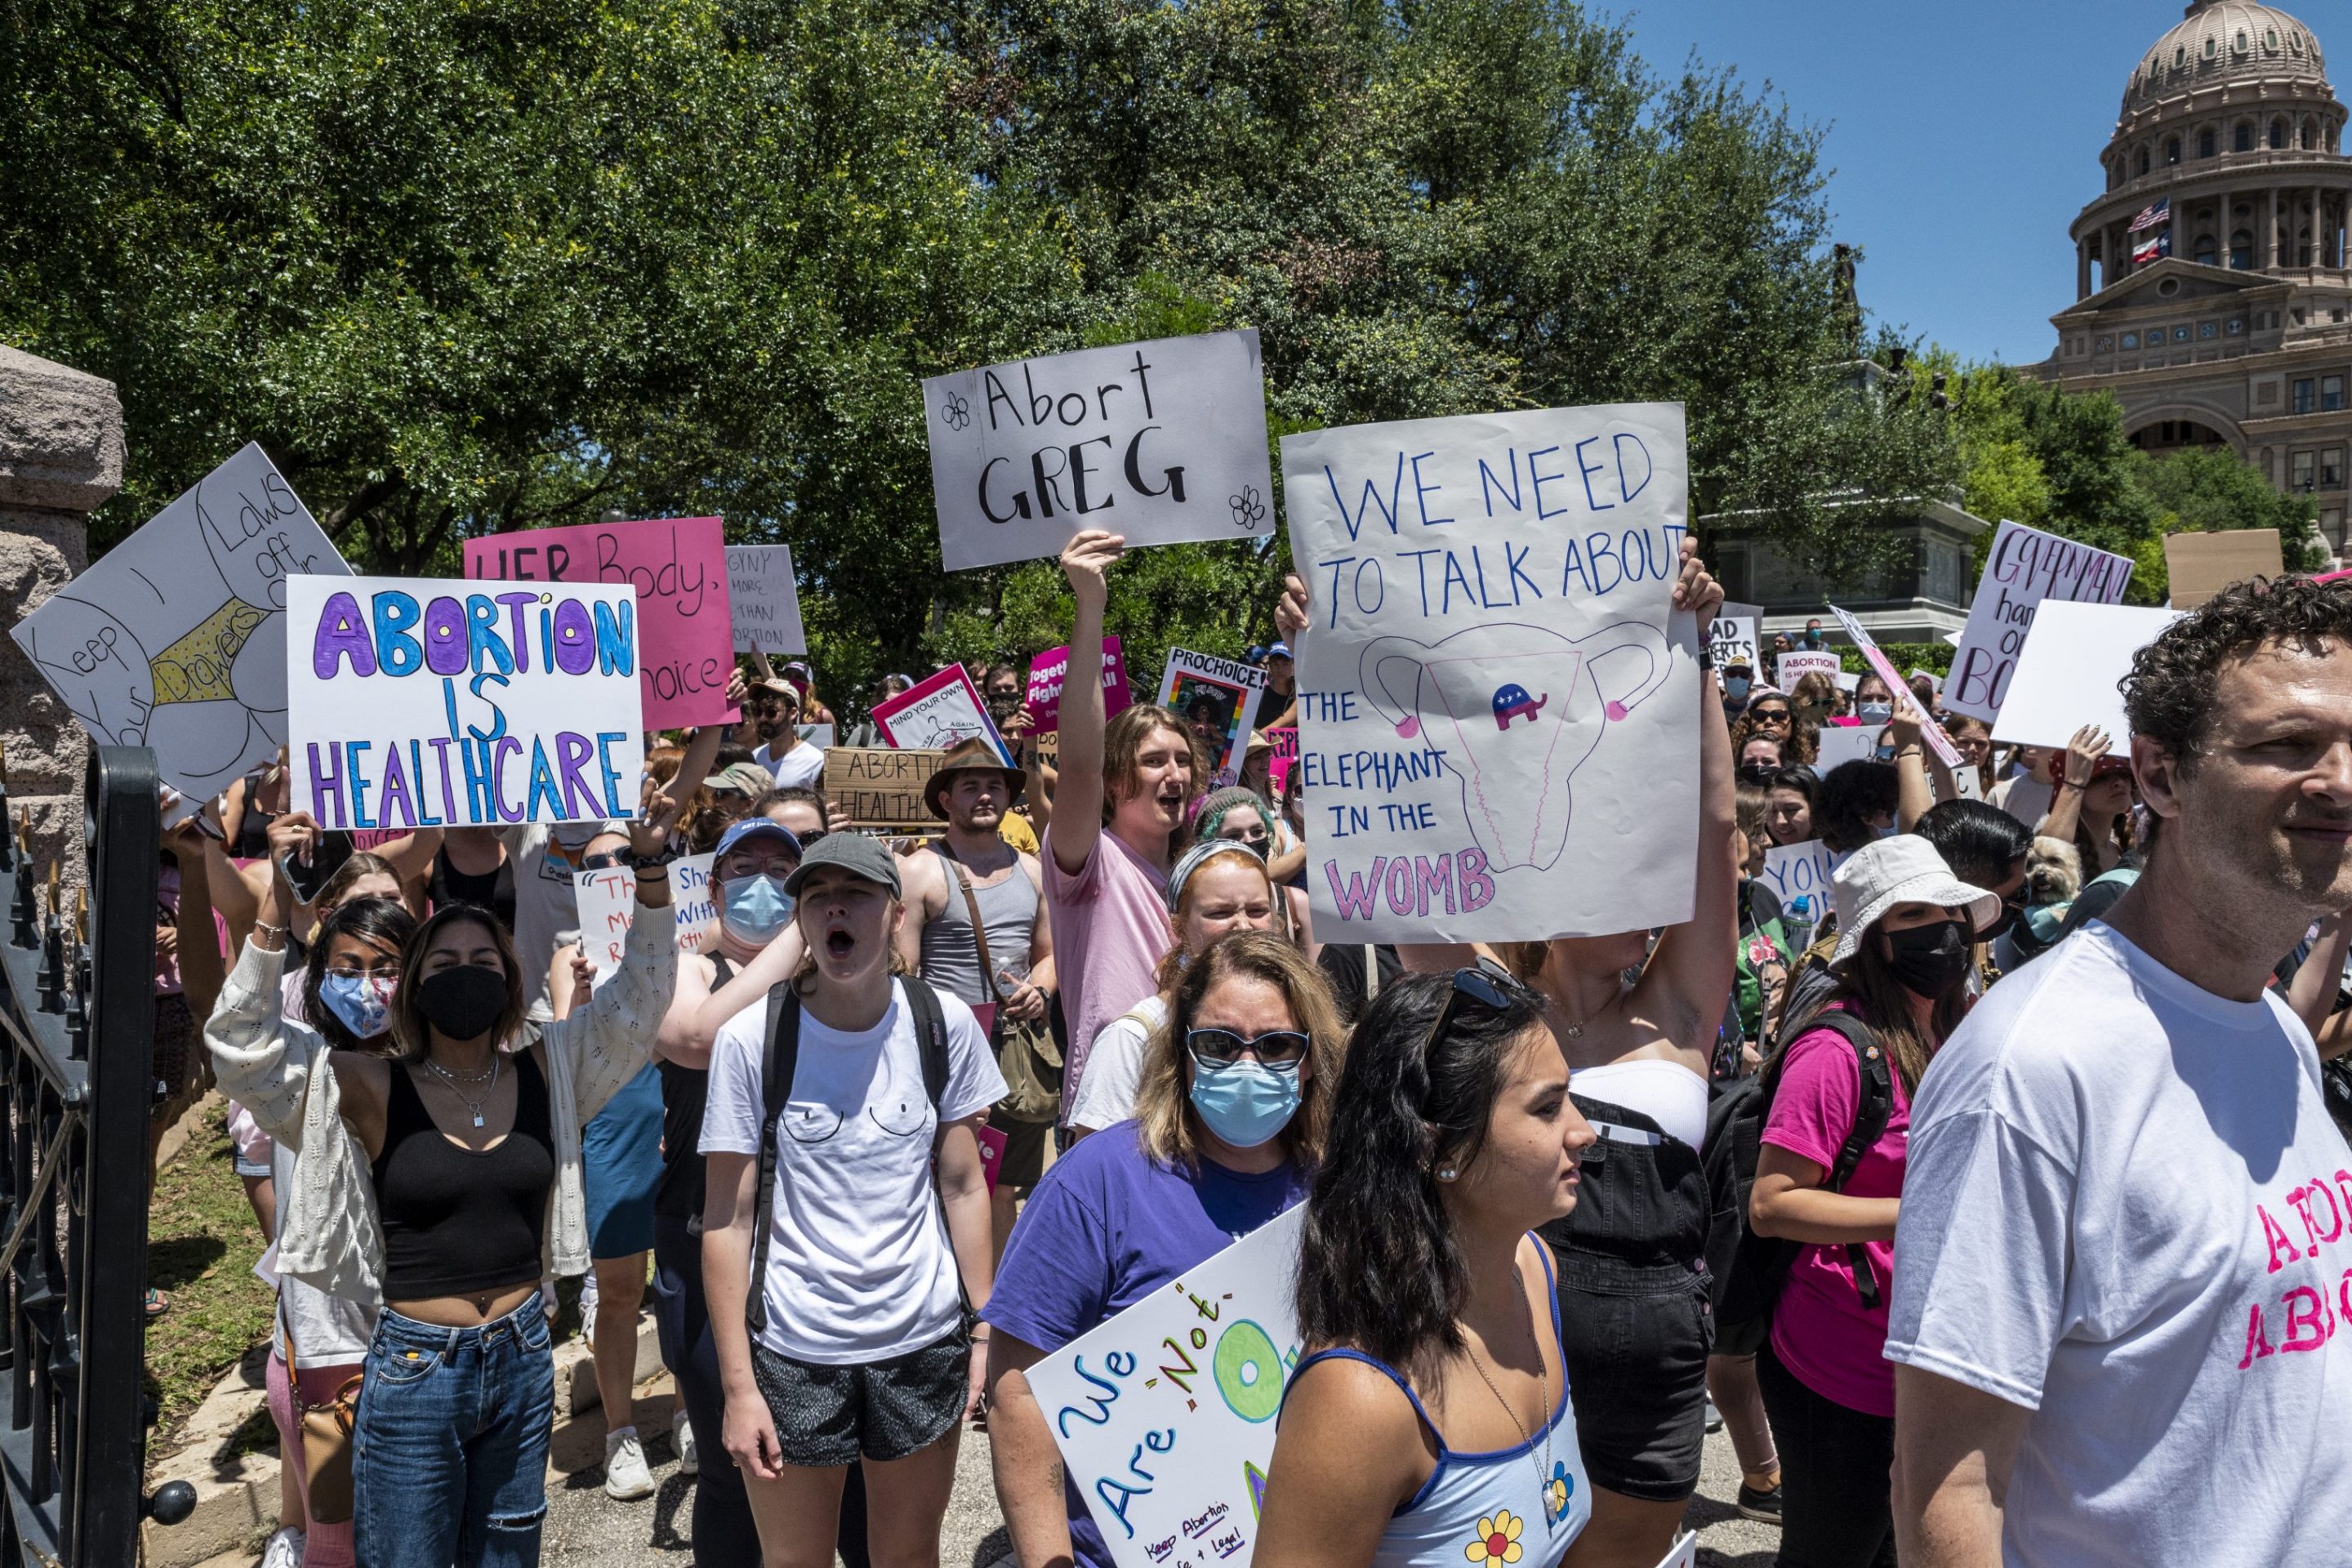 Protesters hold up signs as they march down Congress Ave at a protest outside the Texas state capitol on May 29, 2021 in Austin, Texas. Thousands of protesters came out in response to a new bill outlawing abortions after a fetal heartbeat is detected signed on Wednesday by Texas Governor Greg Abbot.